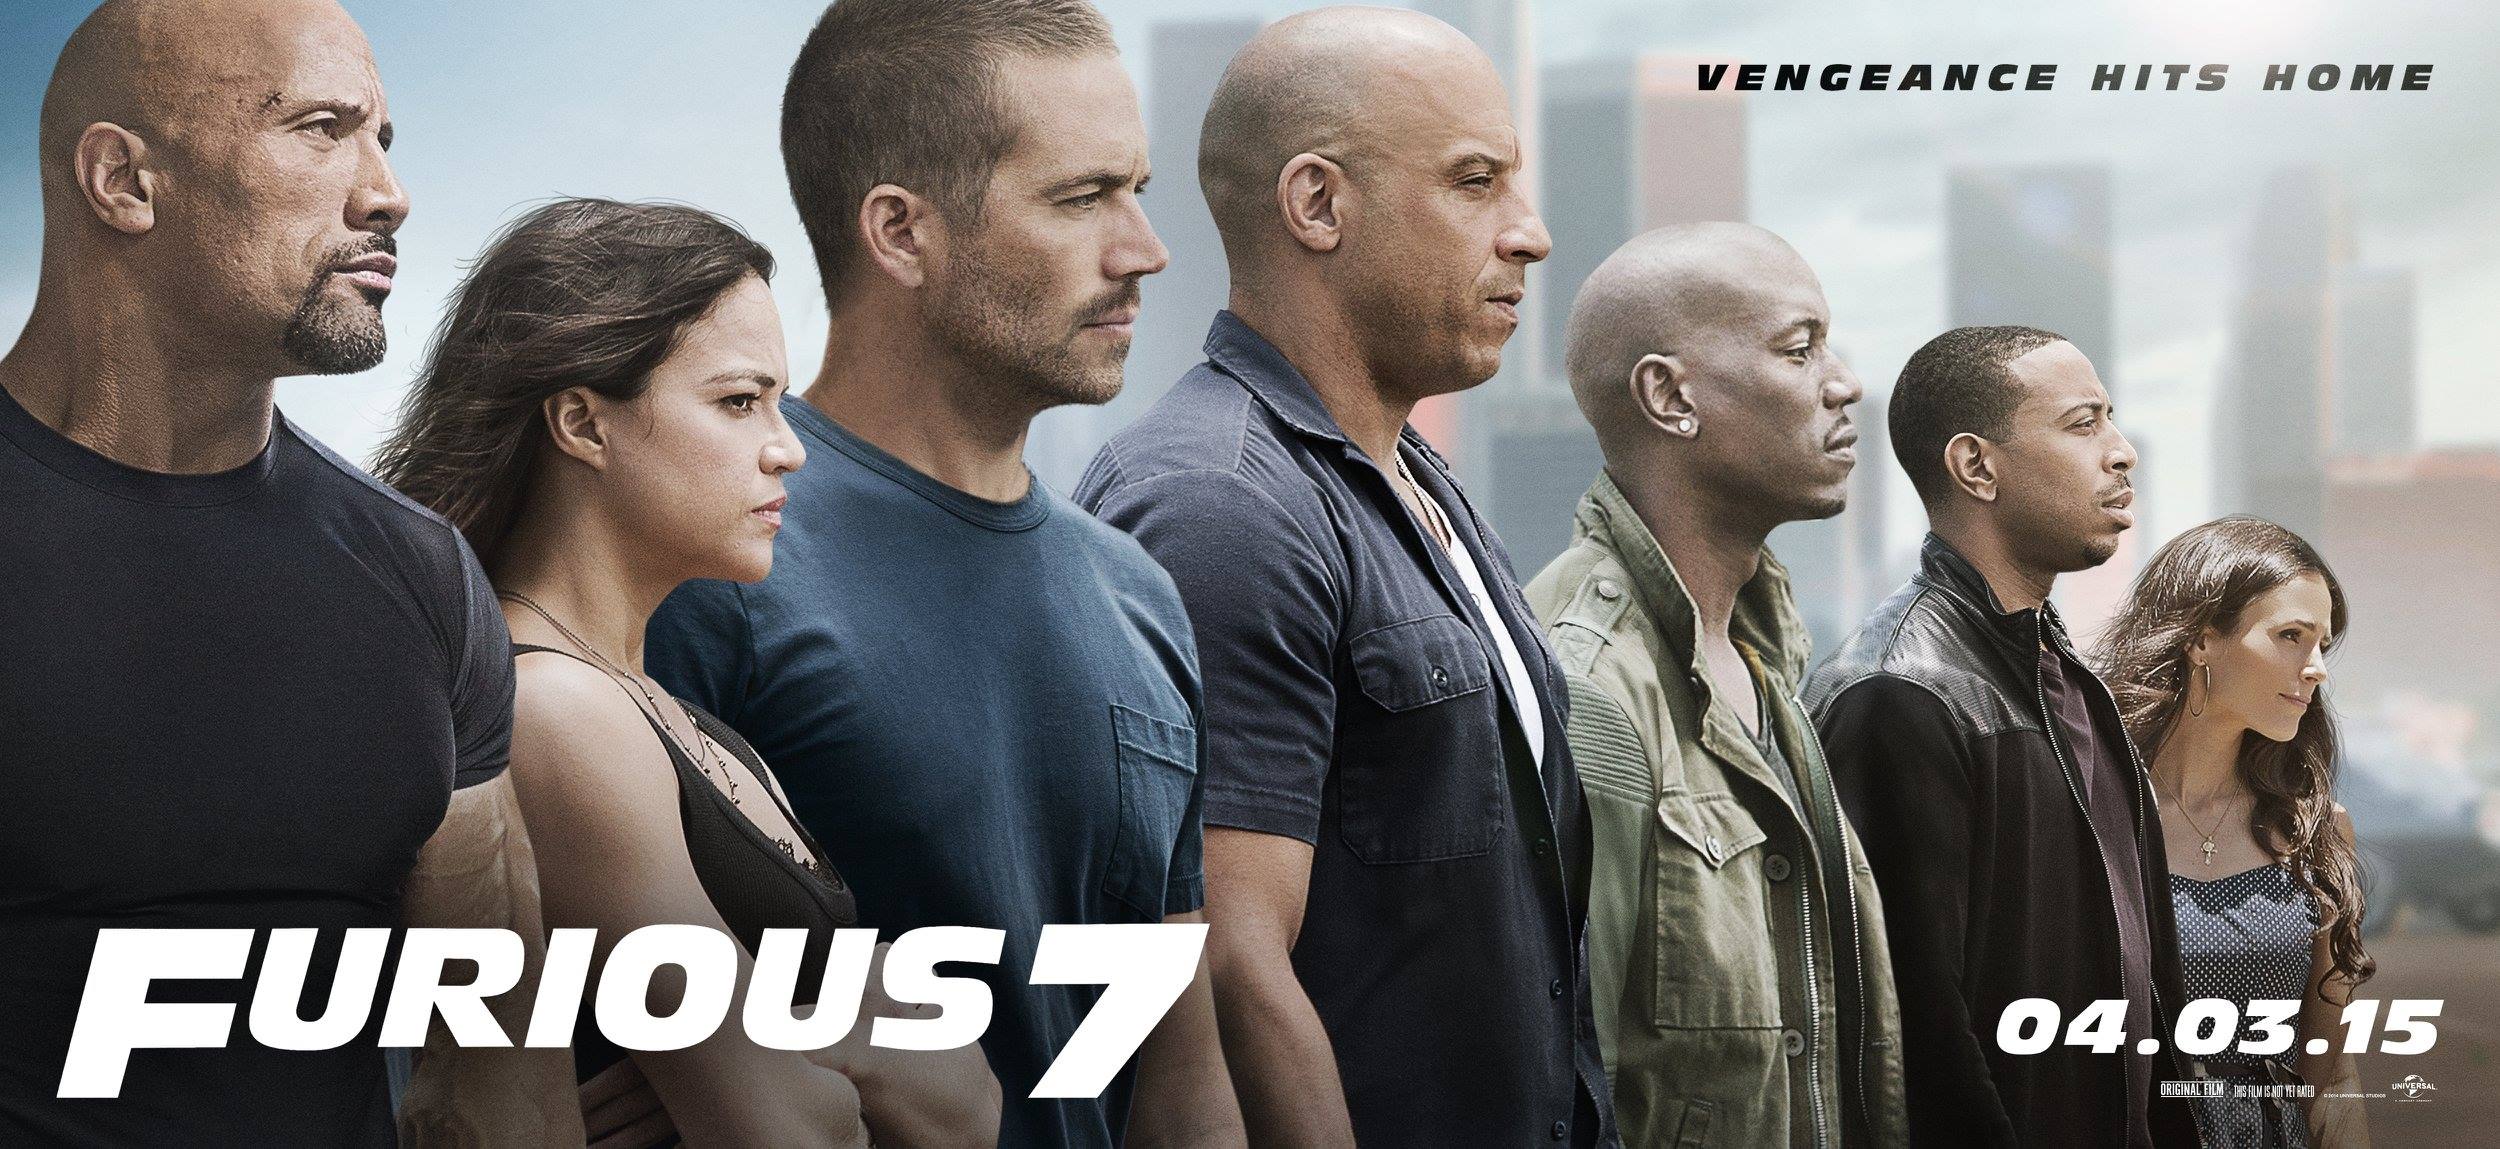 Furious 7 Title, Poster, and Trailer Release Details